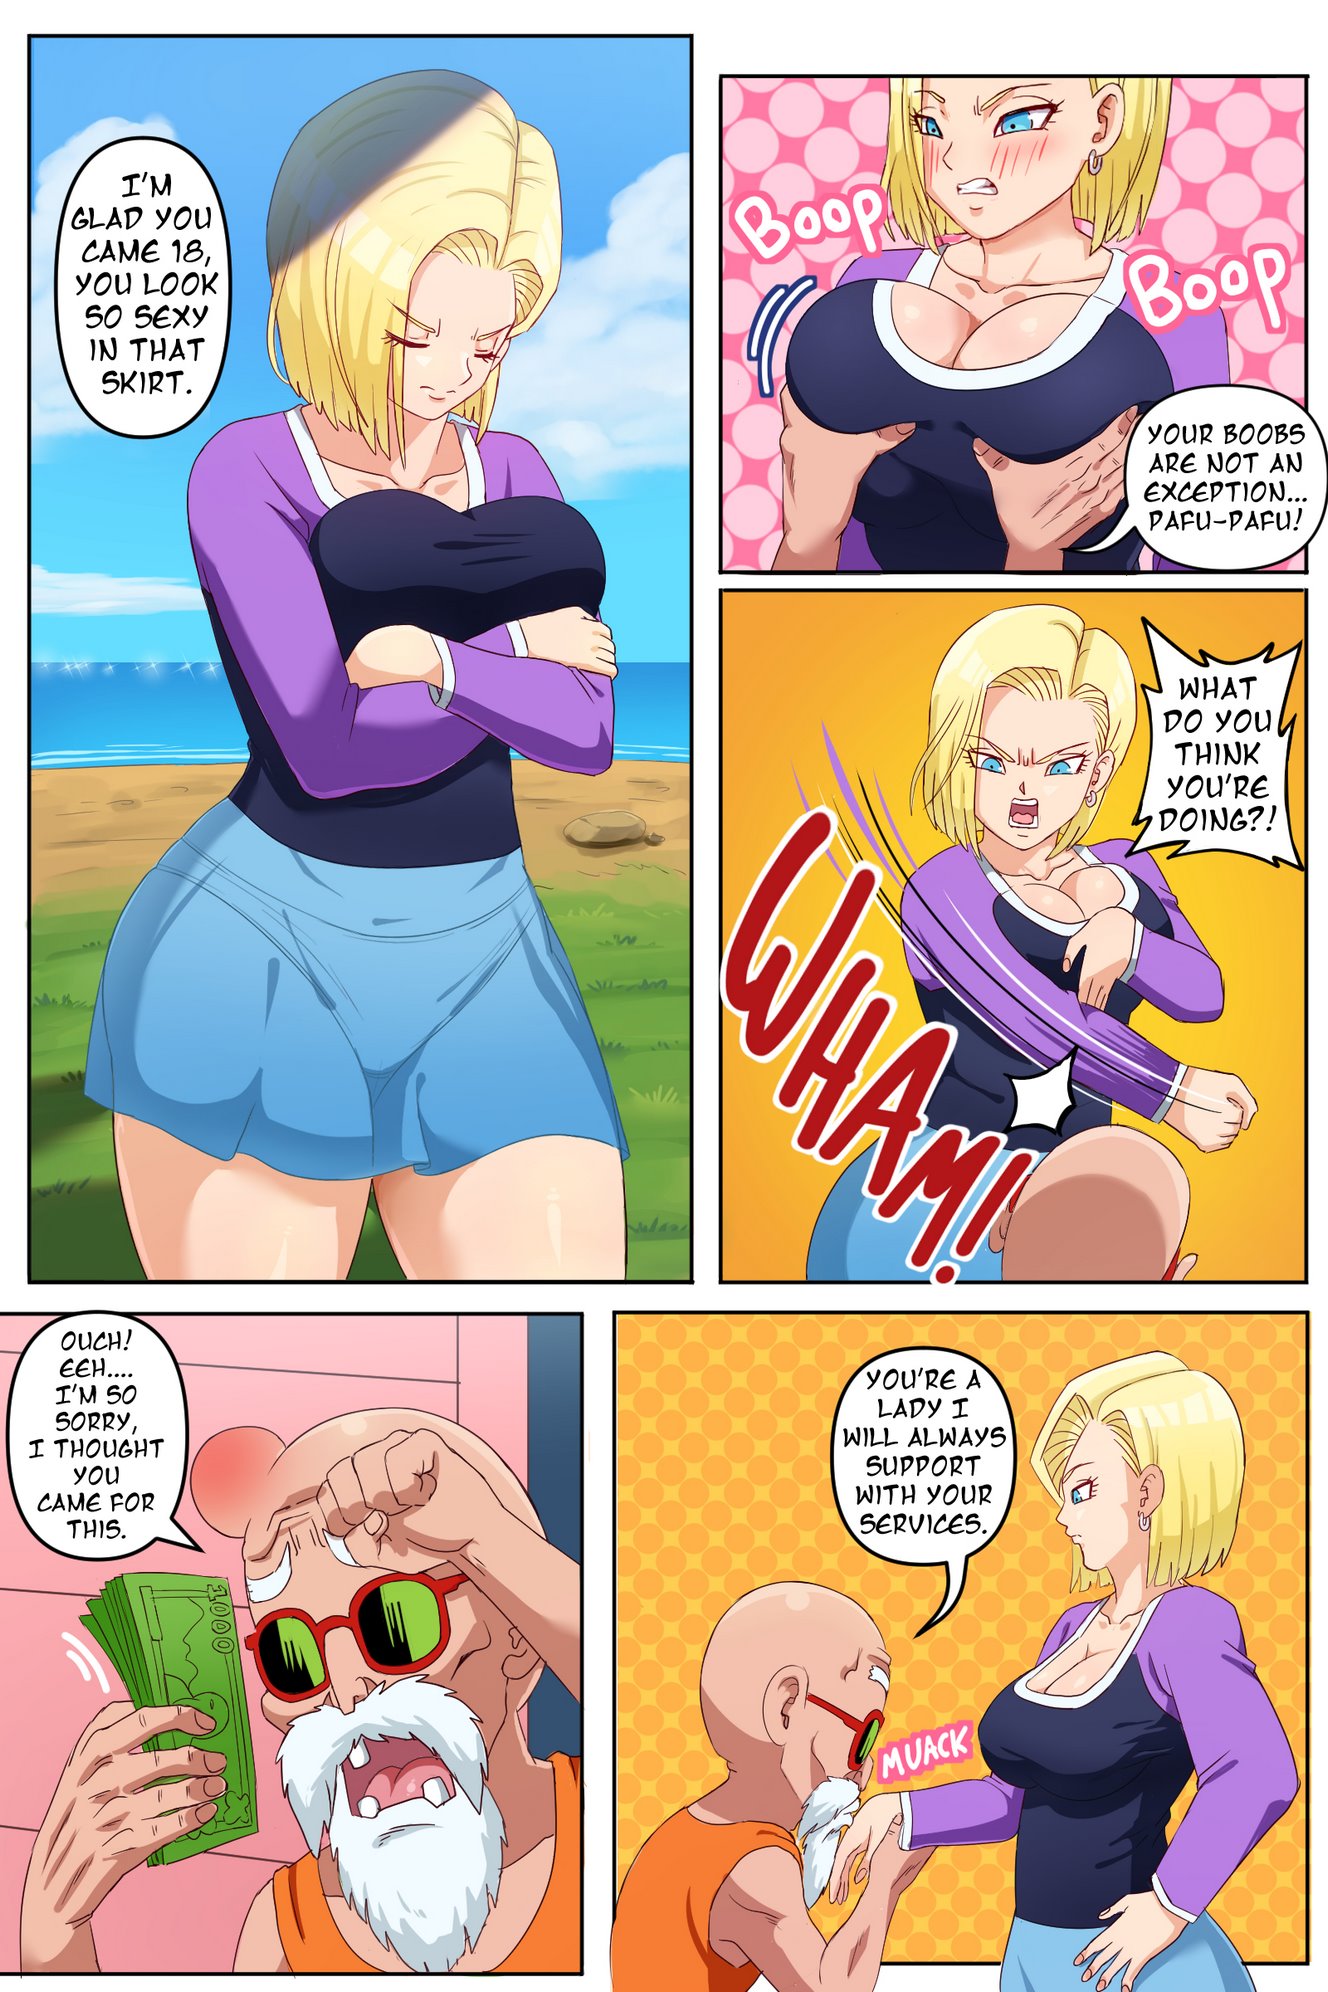 Android 18 Blowjobs - Pink Pawg - Android 18 NTR Ep.1 (Dragon Ball Super) porn comic